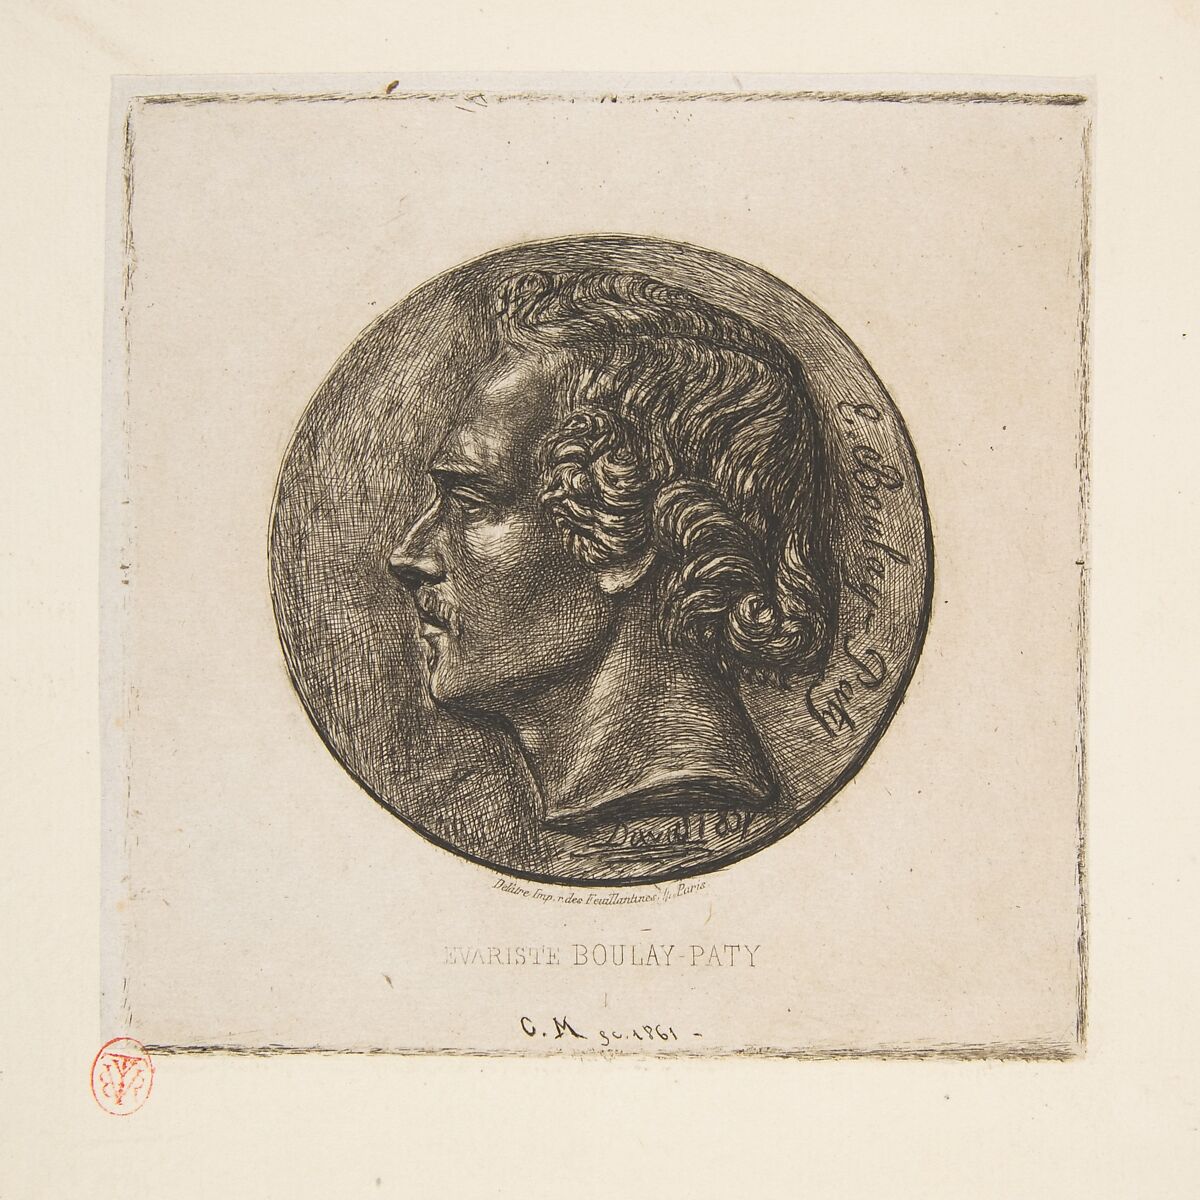 Evariste Boulay-Paty, Charles Meryon (French, 1821–1868), Etching on laid paper 